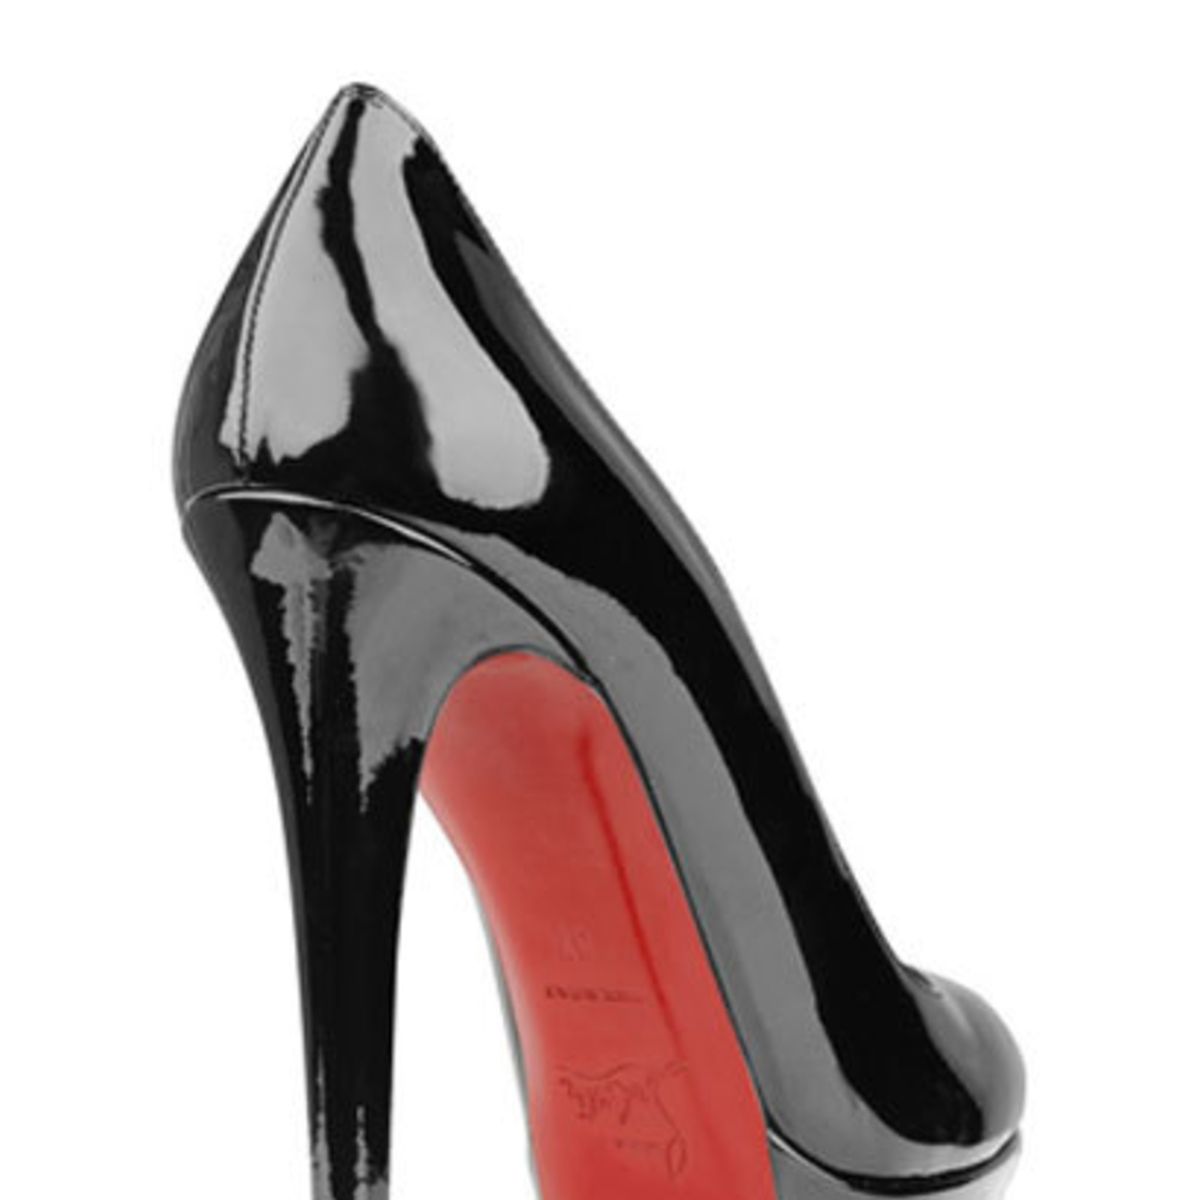 Christian Louboutin has won legal support for his trademarked red